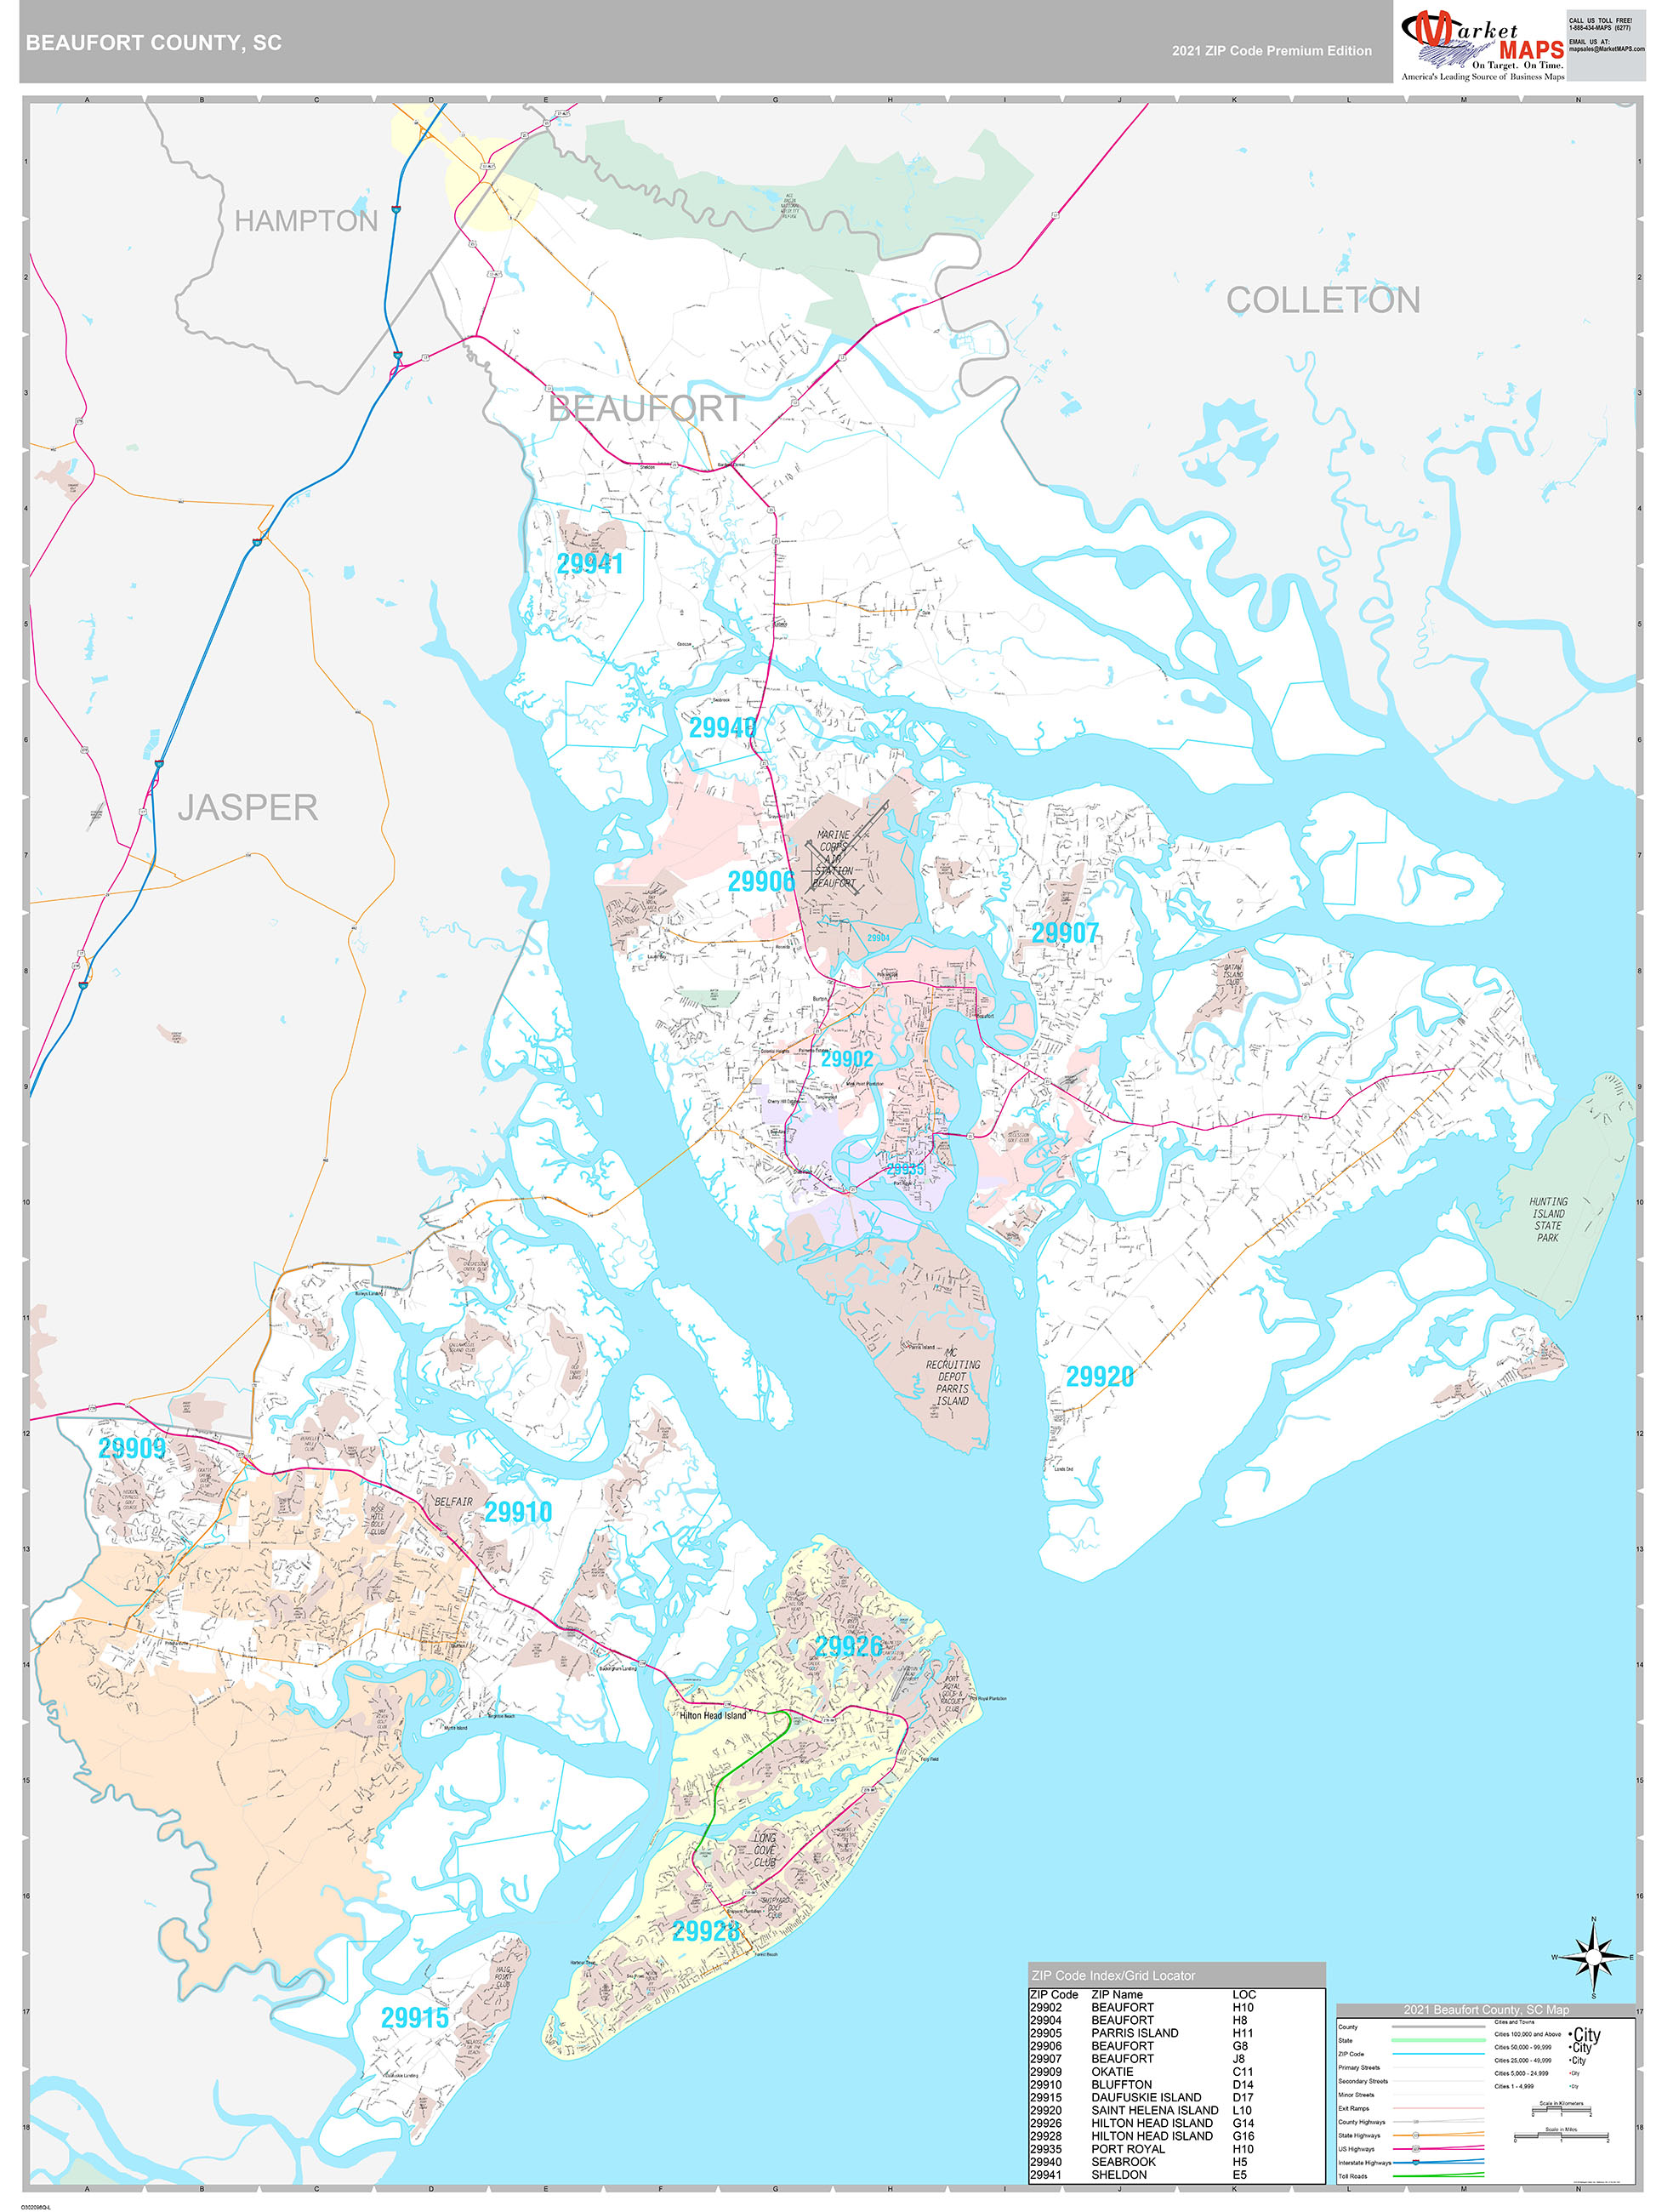 Beaufort County, SC Wall Map Premium Style by MarketMAPS - MapSales